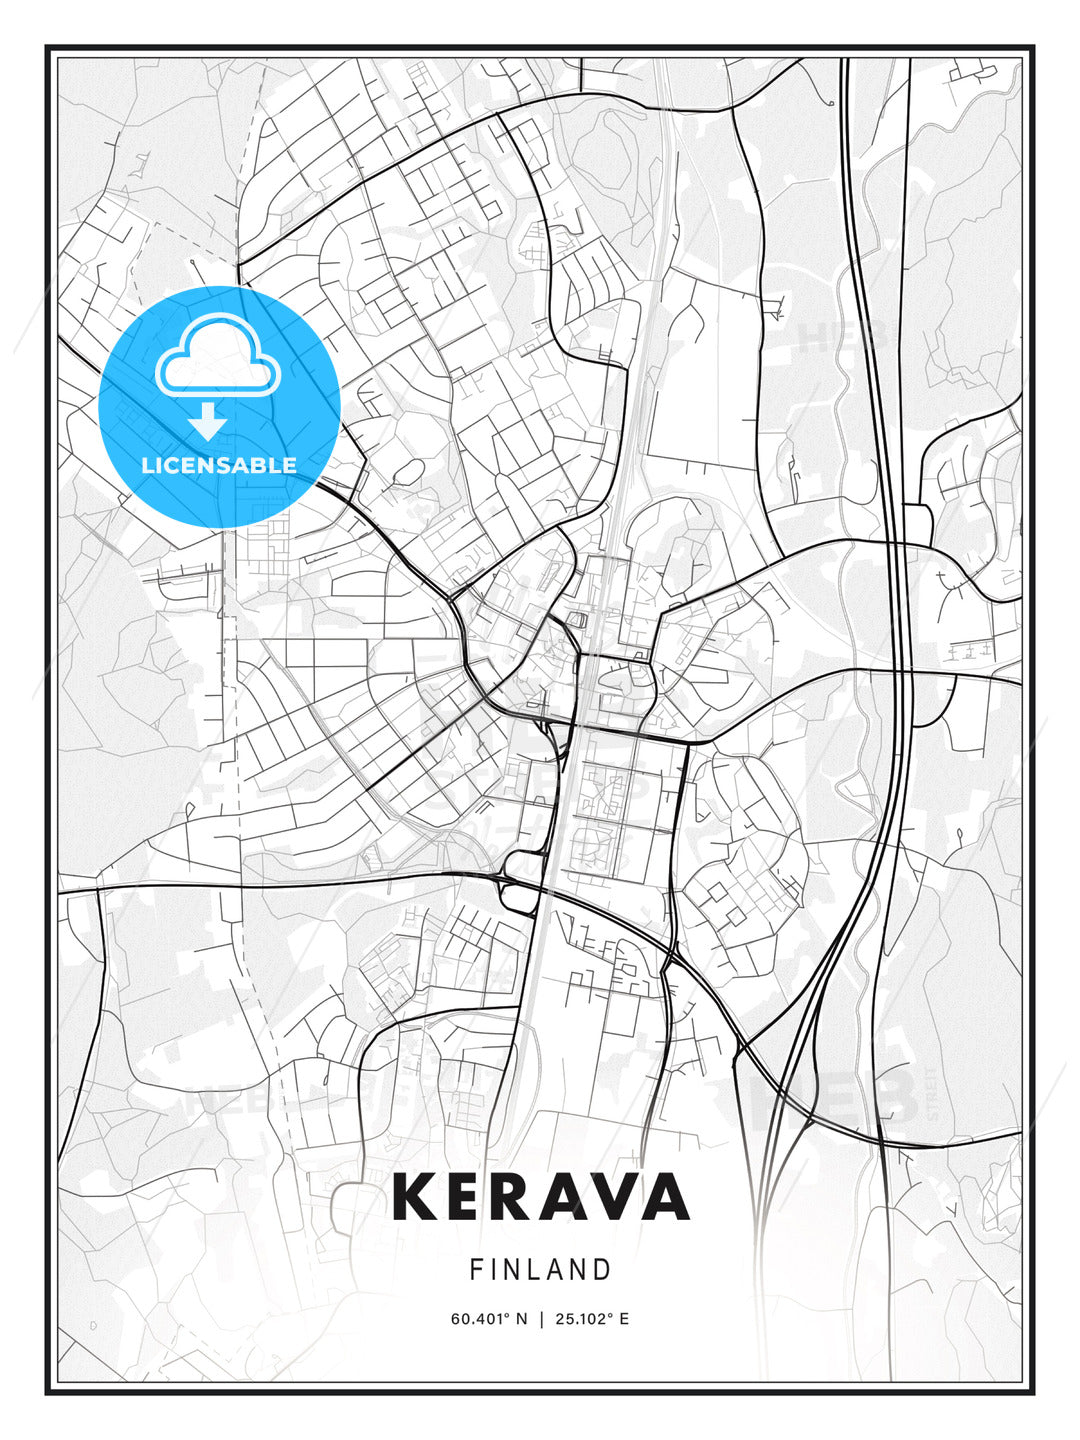 Kerava, Finland, Modern Print Template in Various Formats - HEBSTREITS Sketches